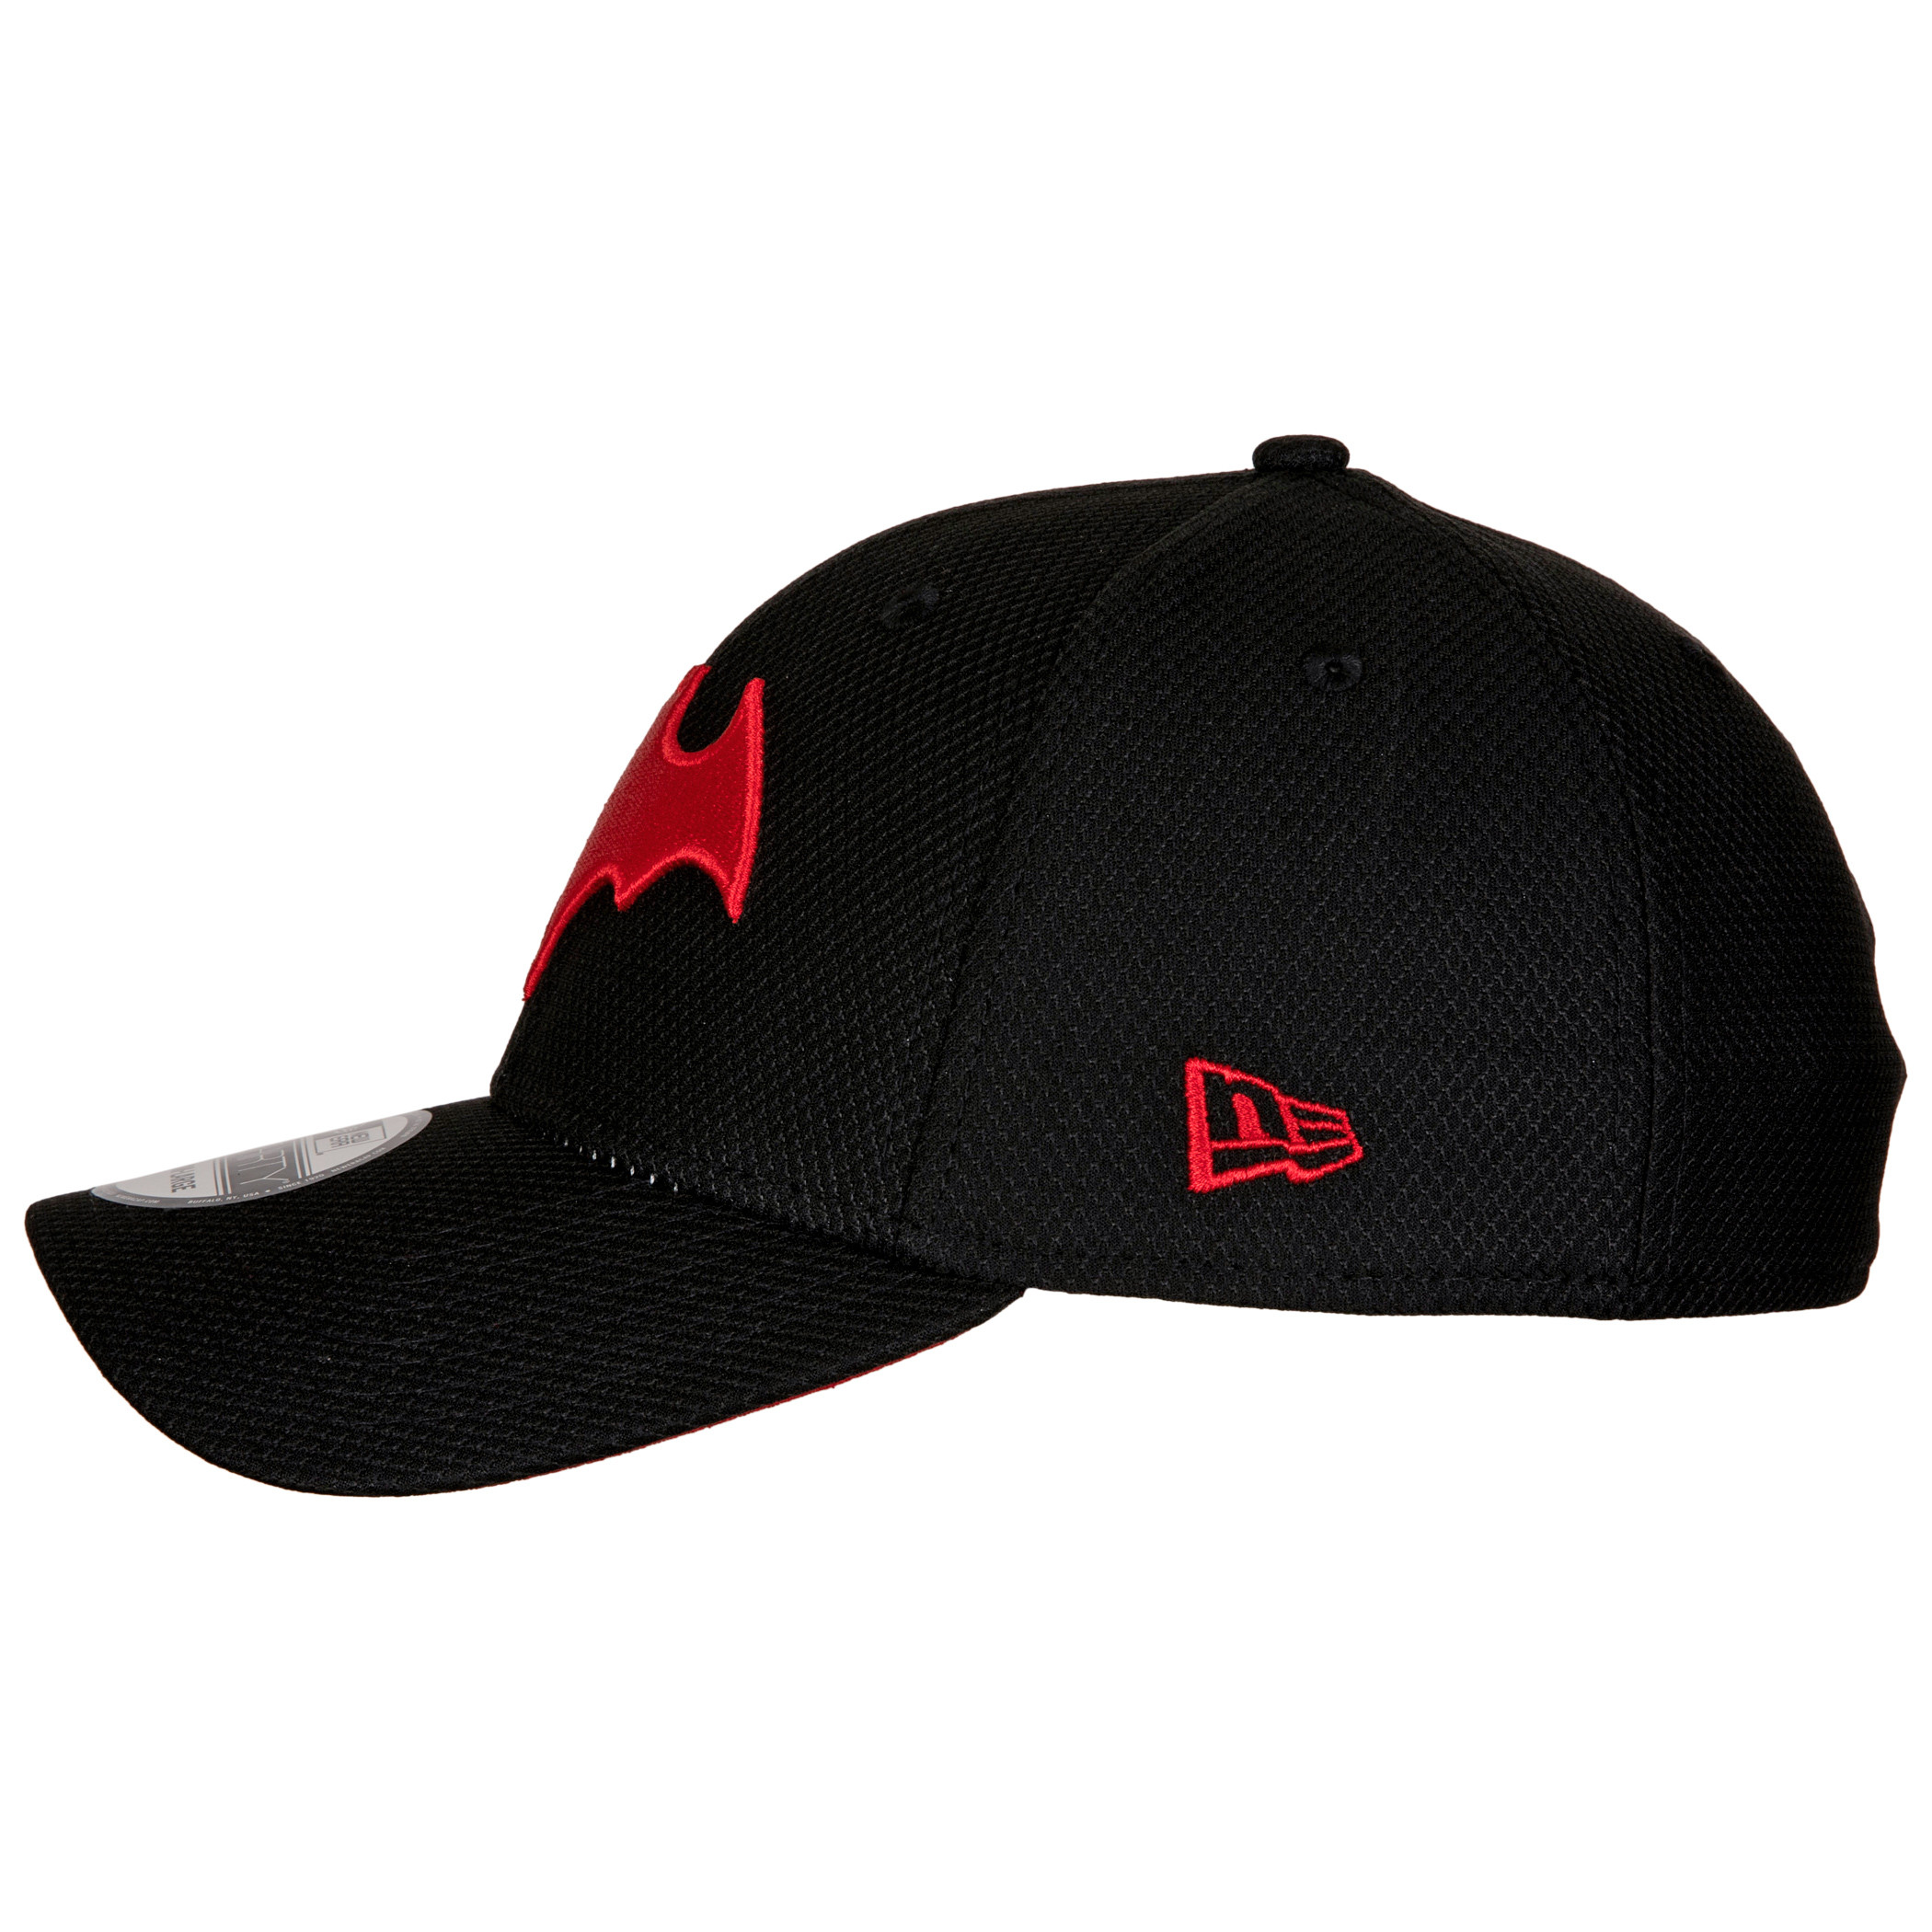 Batman Battle for The Cowl Symbol 39Thirty Fitted Hat